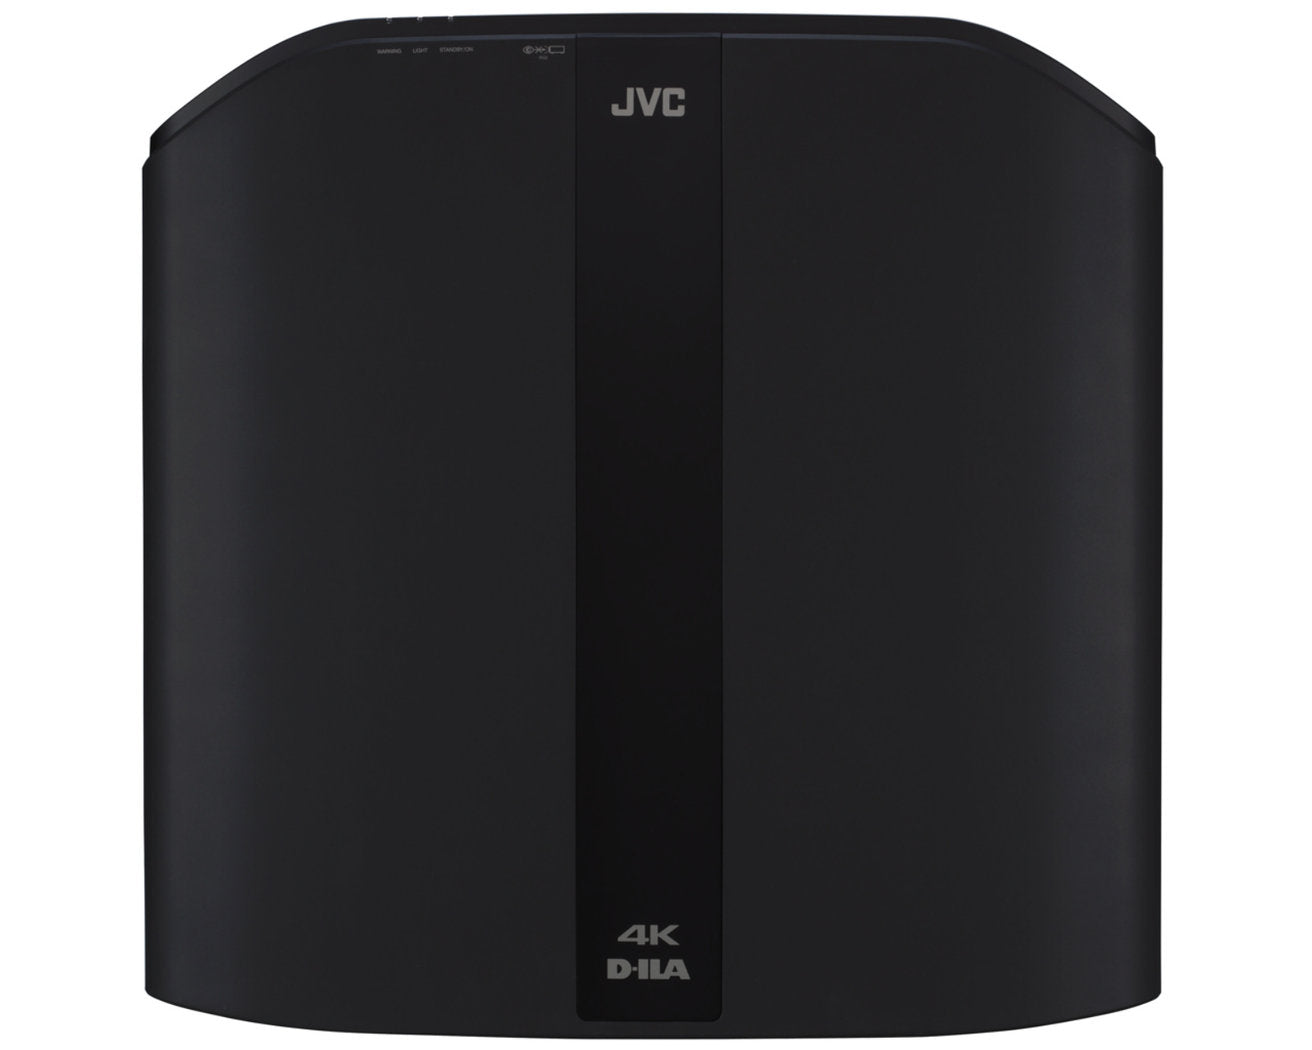 JVC DLA-NP5 4K home theater projector